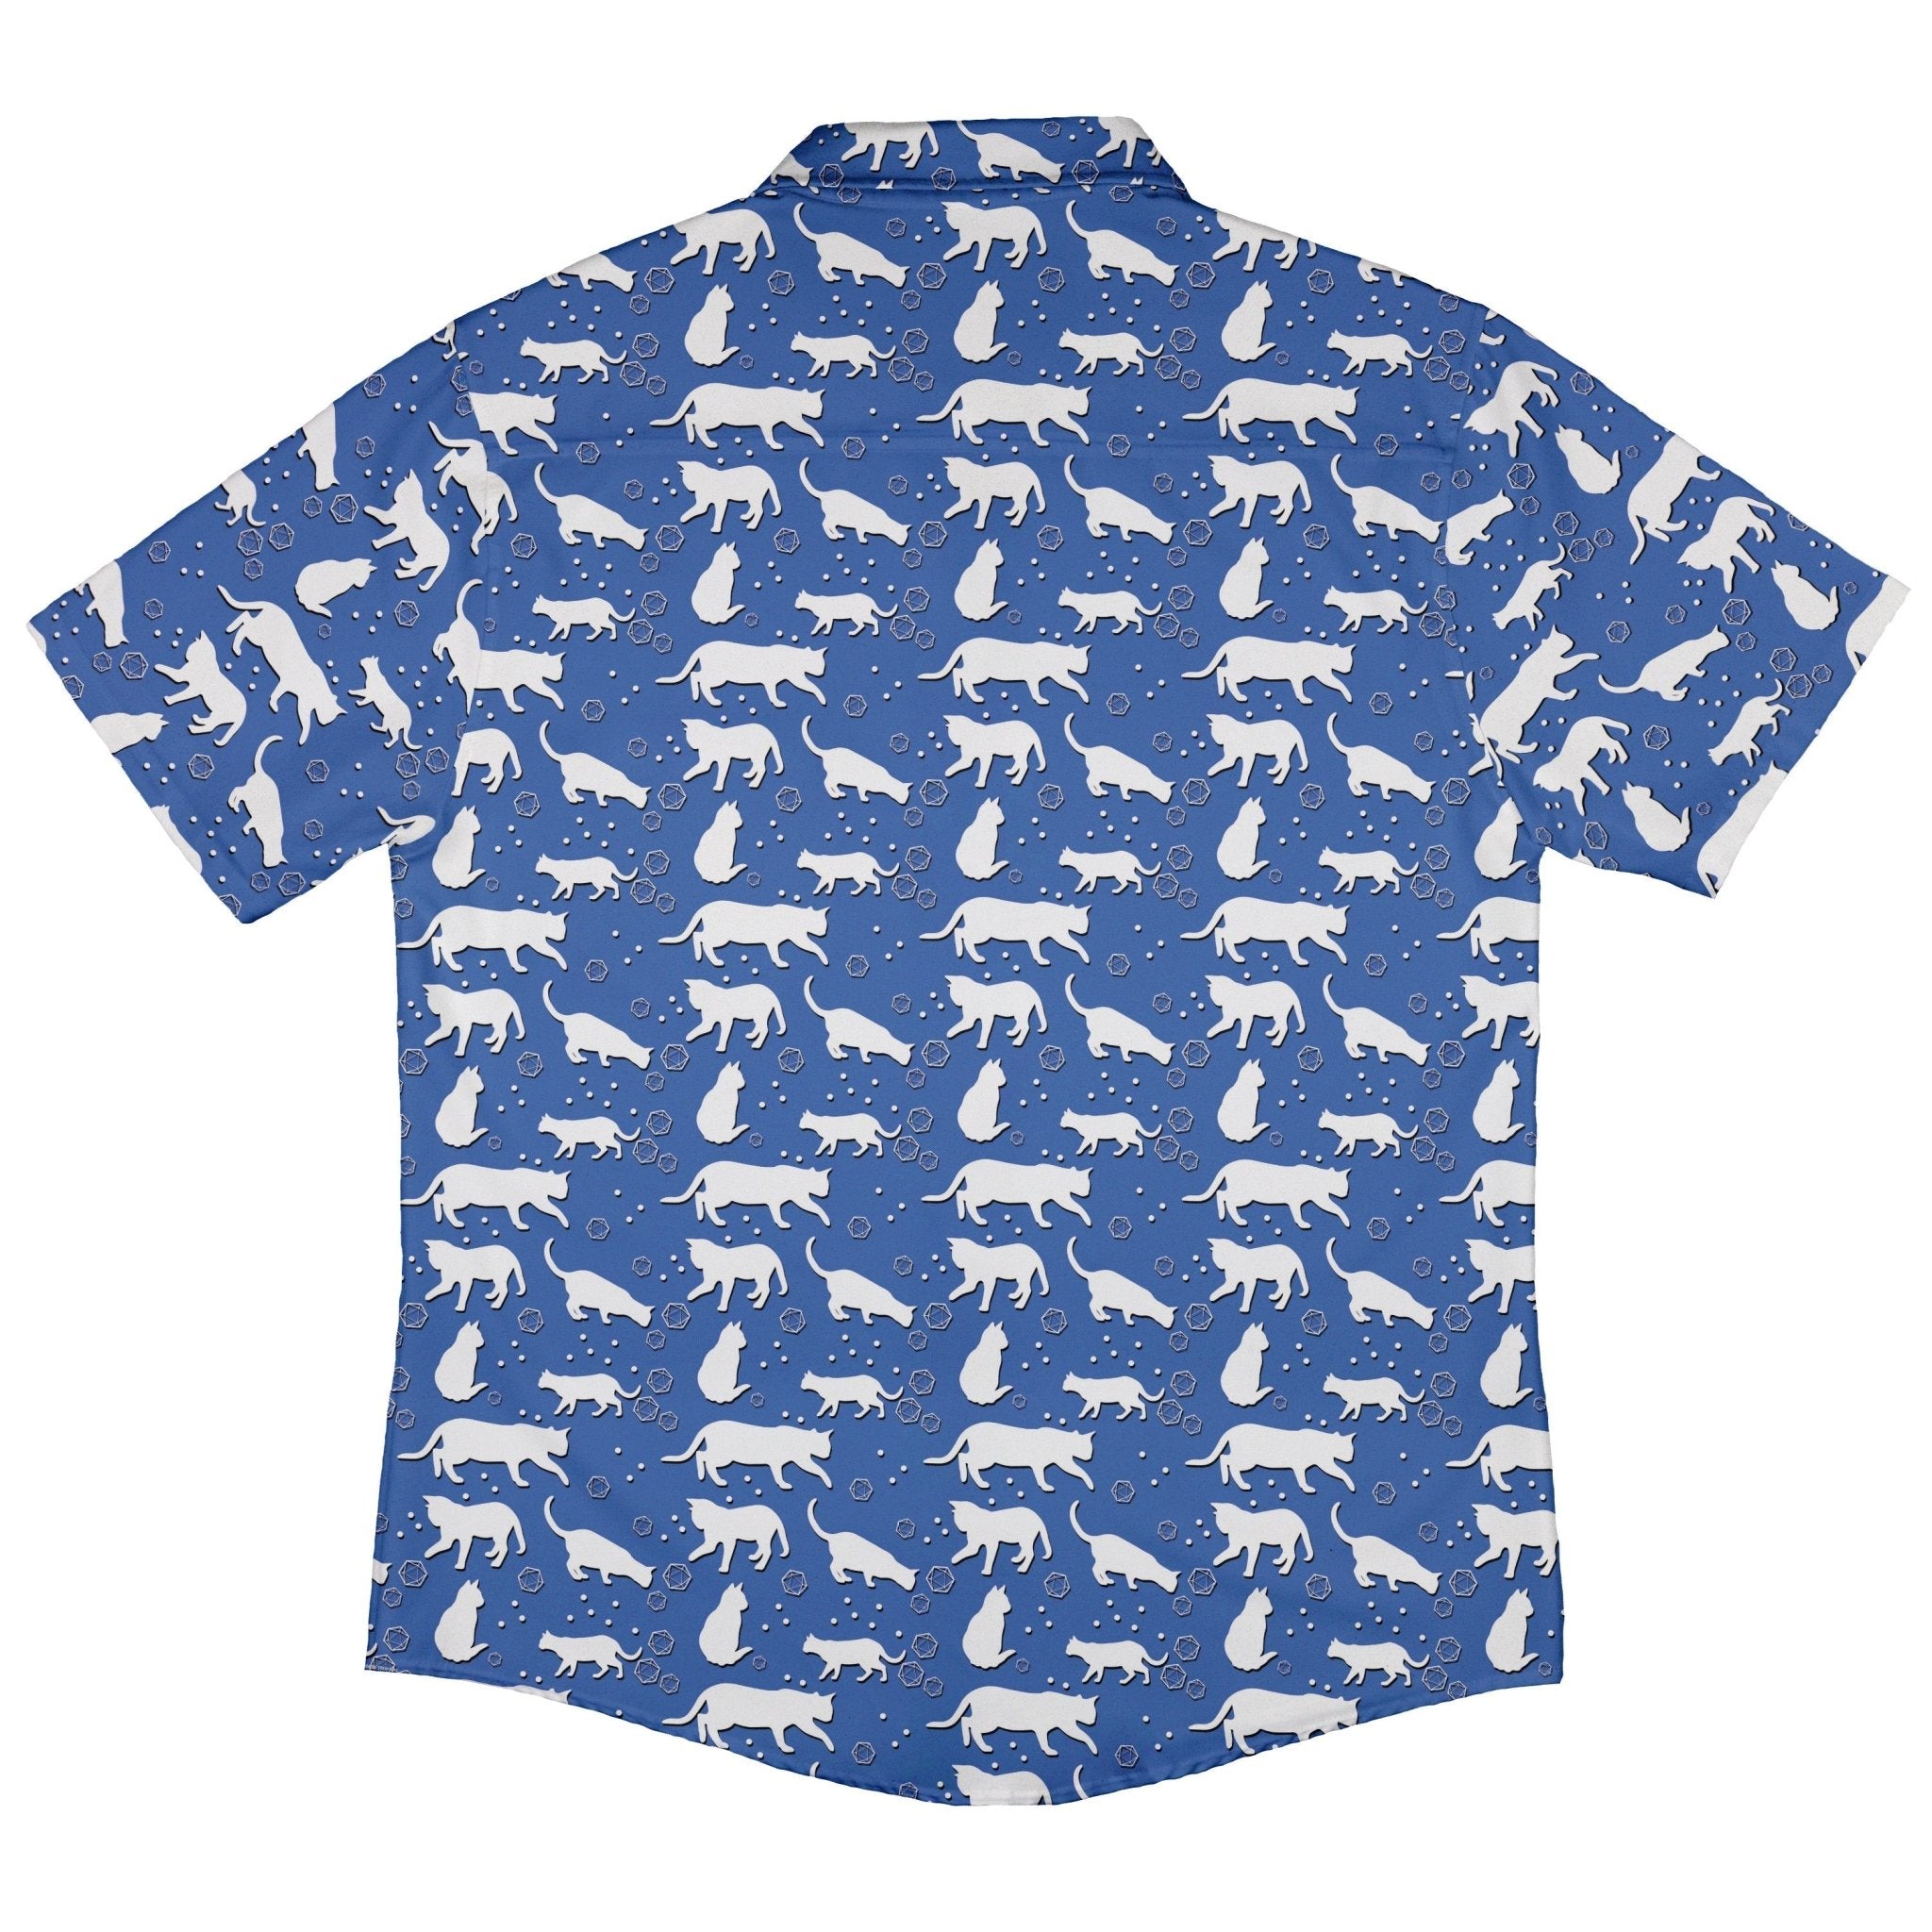 Dnd Dice Cats Button Up Shirt - adult sizing - Animal Patterns - Design by Heather Davenport